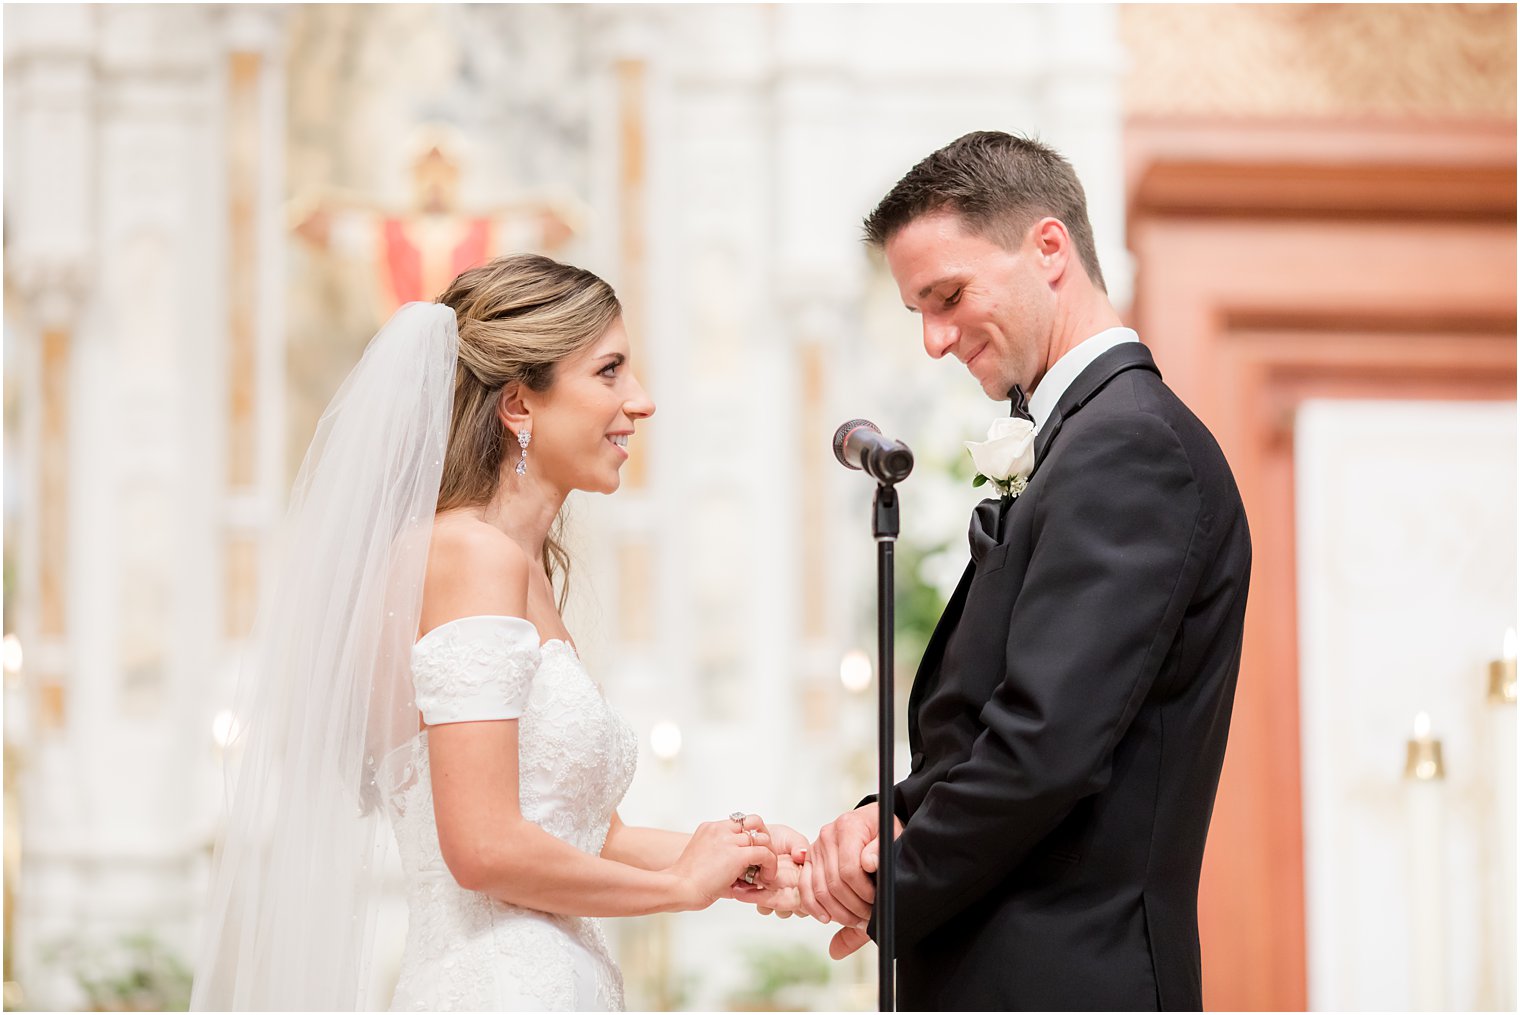 newlyweds exchange vows during wedding ceremony at St. Vincent's Martyr Catholic Church